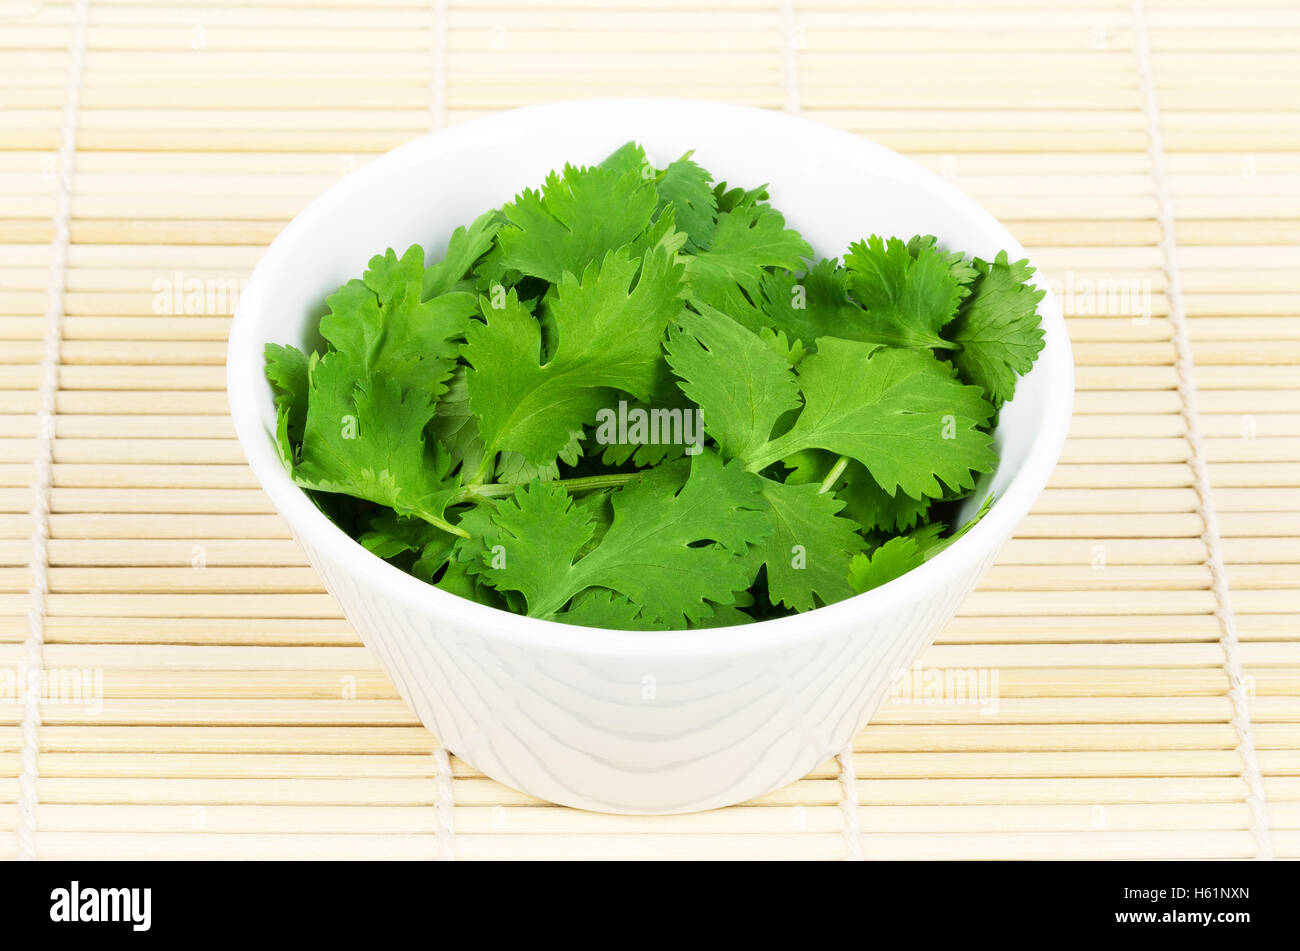 Fresh coriander leaves, also known as cilantro, Chinese parsley and dhania, in a white porcelain bowl on white background. Stock Photo